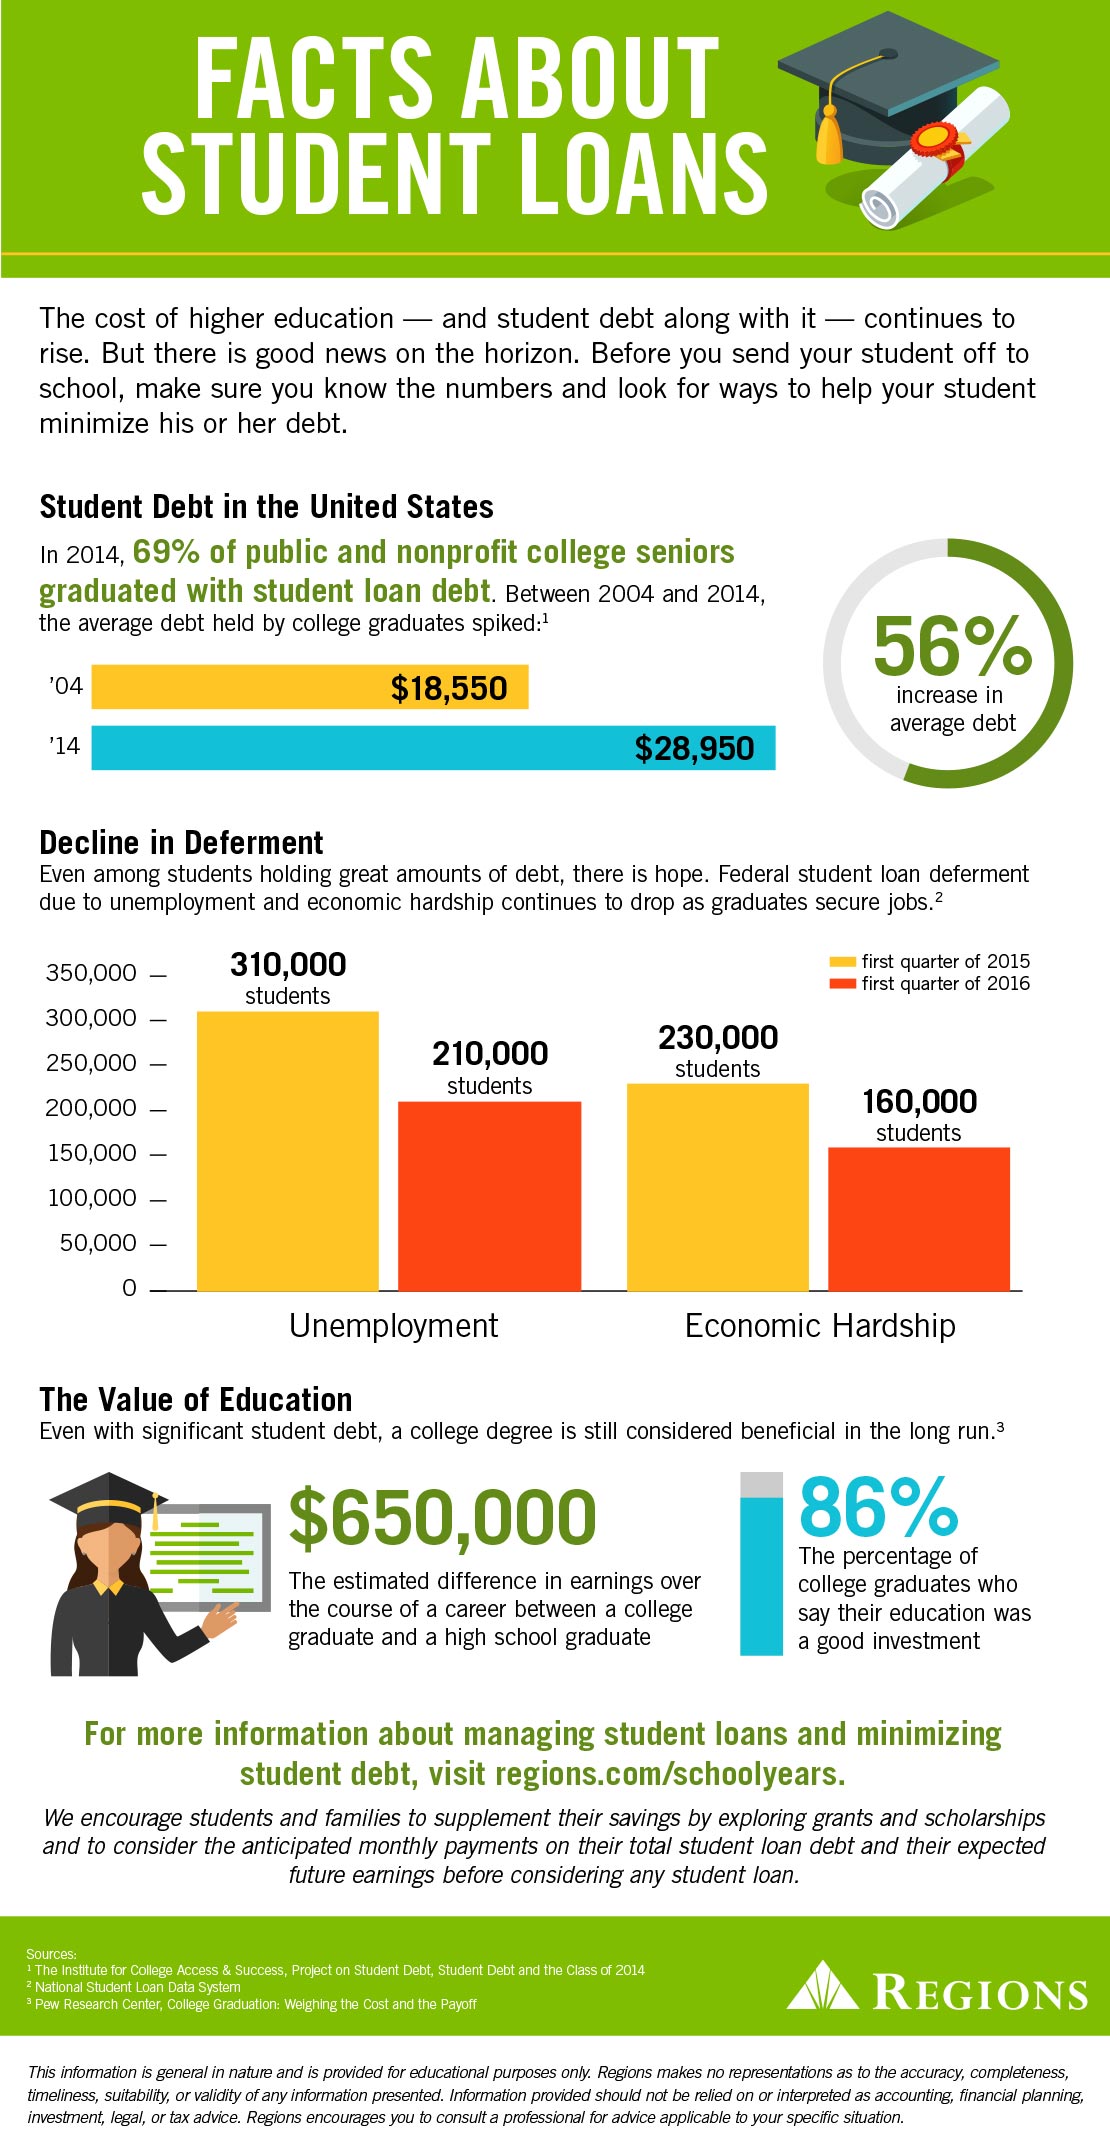 facts about student loans